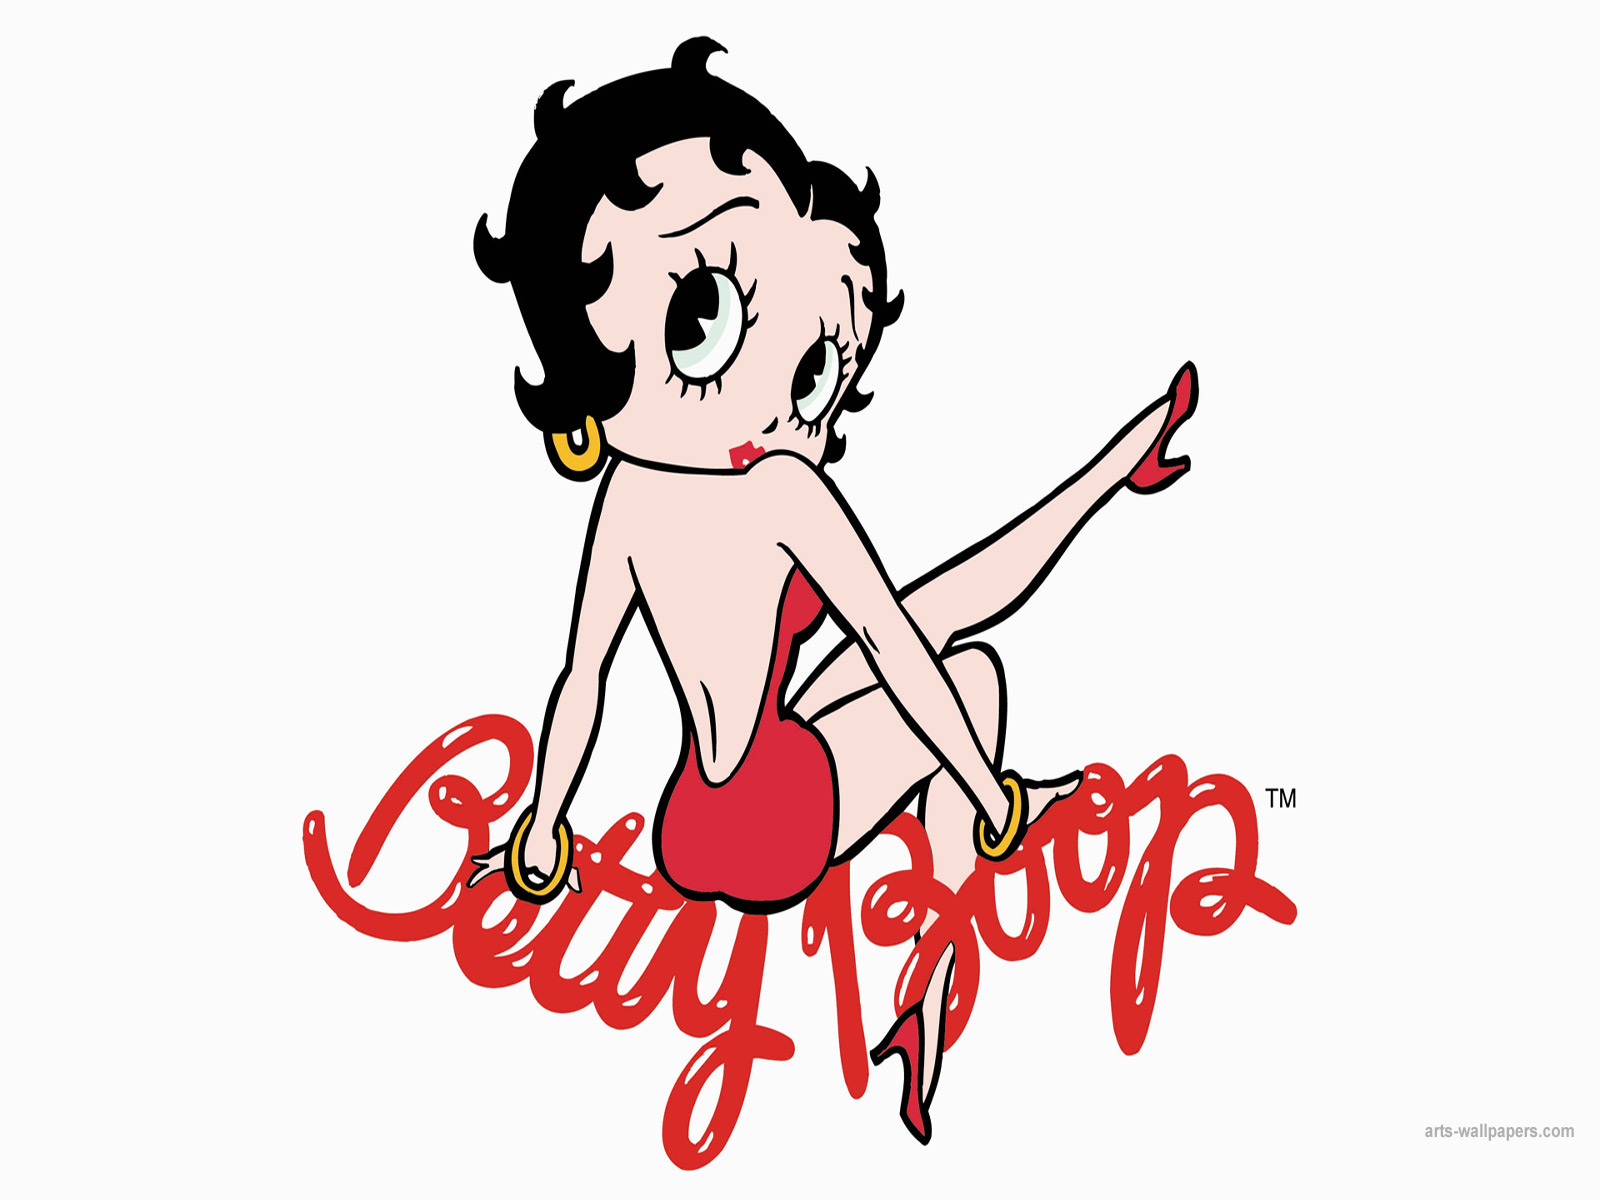 Find more com19201920x1080 betty boop wallpaper 25E225802593free wallpapers...